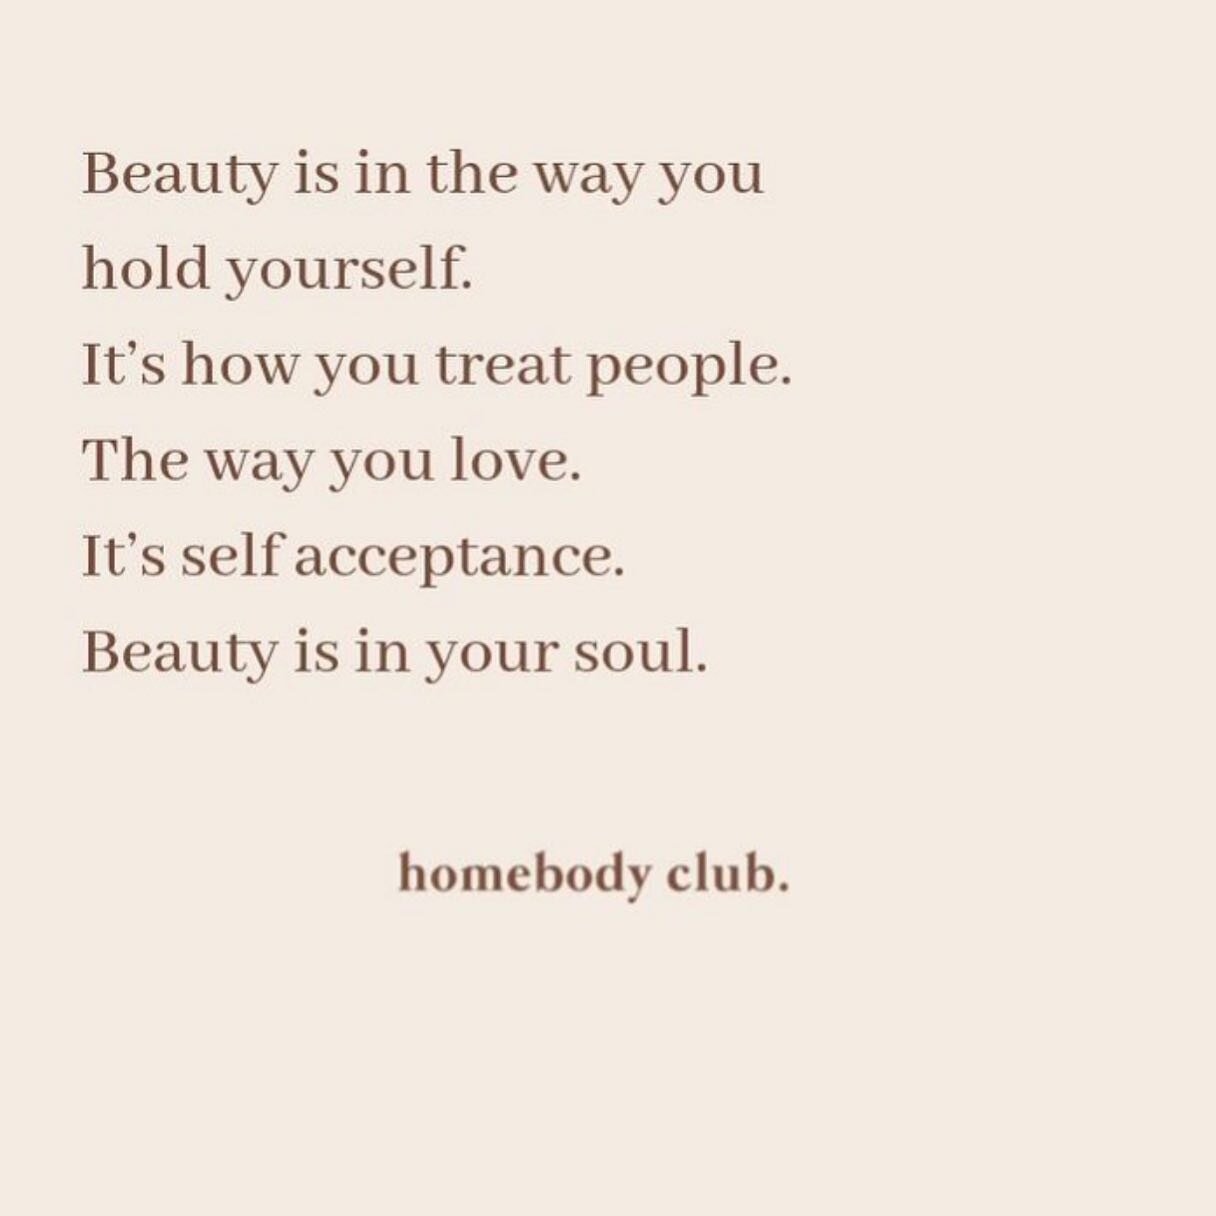 I love my job + getting to make women feel confident and beautiful through their hair + providing some relaxing self care time.

But these words are equally as important to remember. True beauty comes from within. It reflects through the way you do l